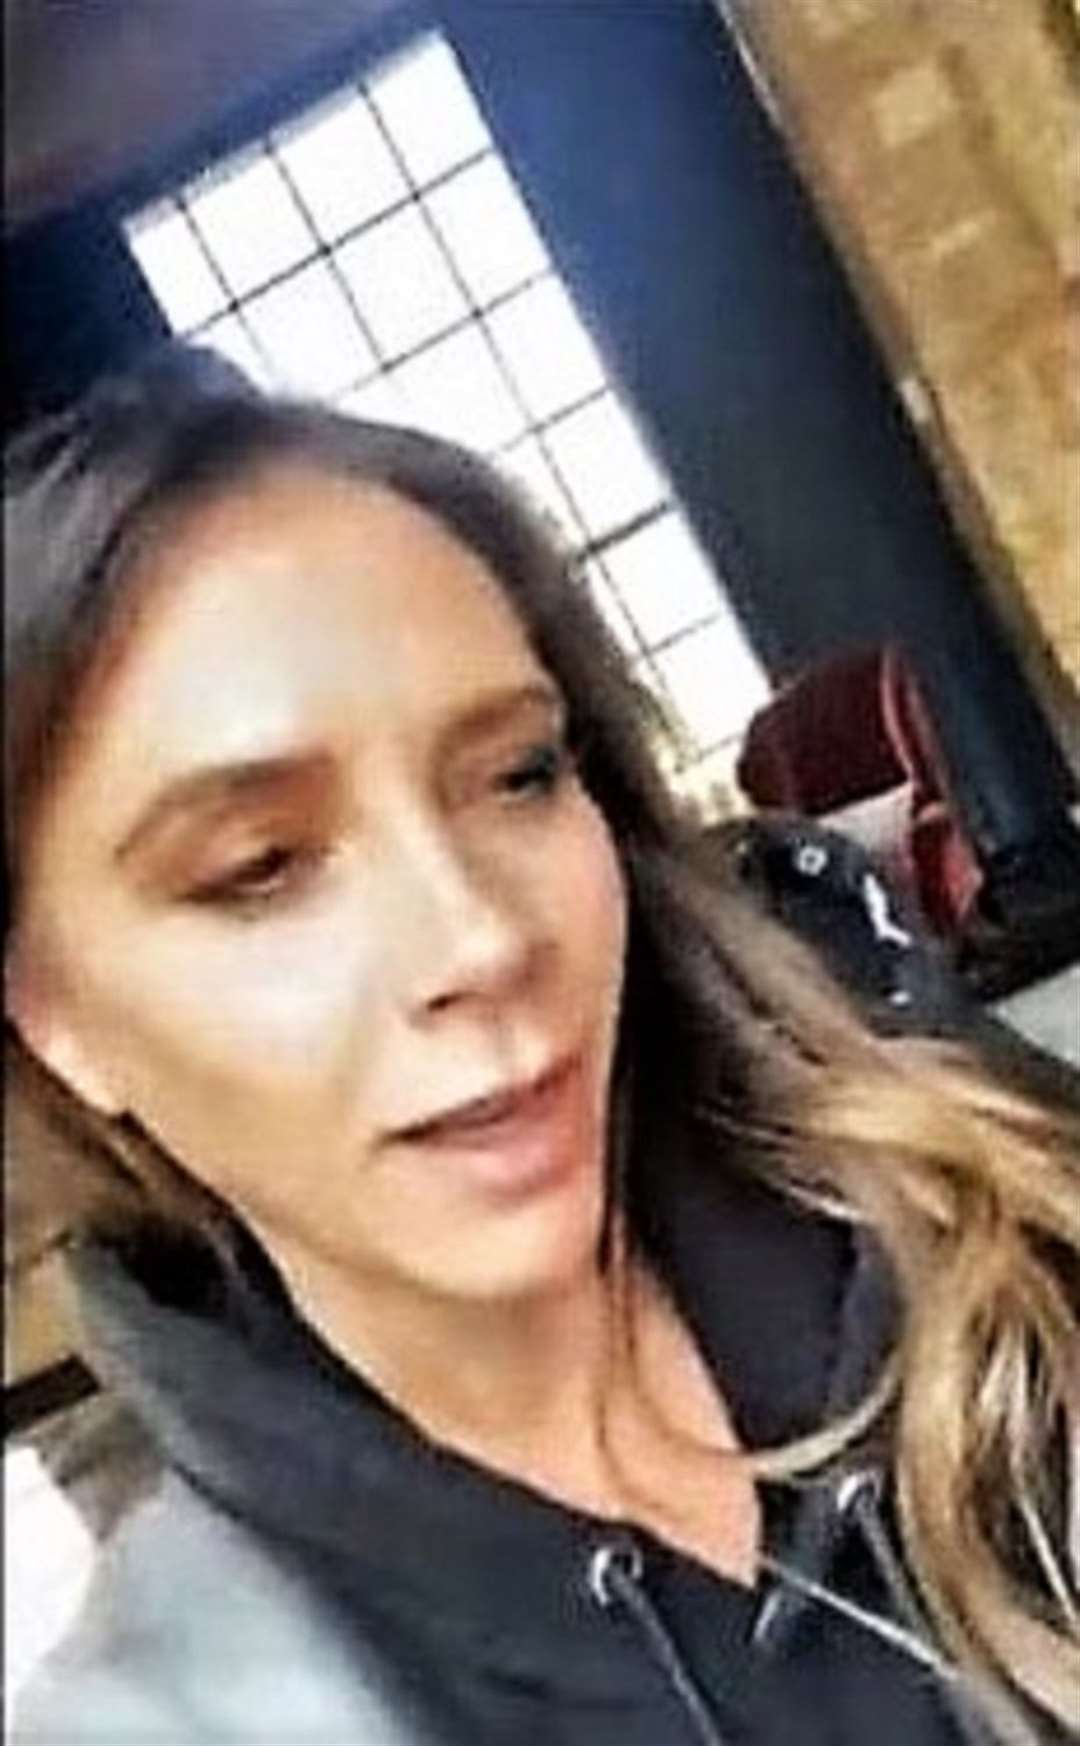 An image of Victoria Beckham during the video link taken from her Instagram post.